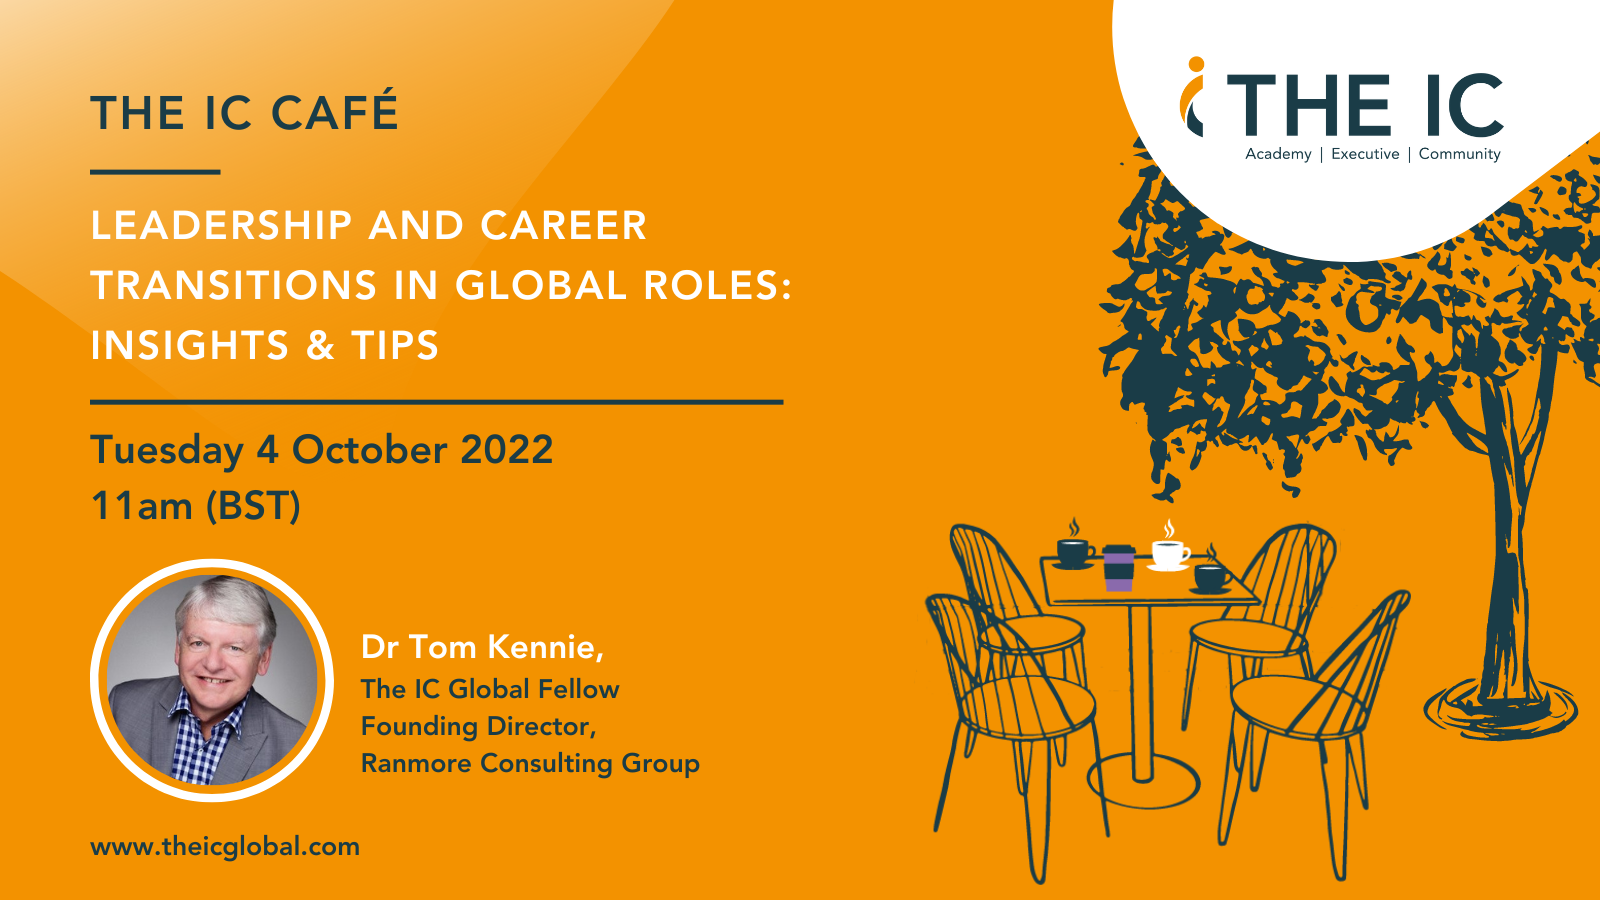 The IC Café: Leadership and Career Transitions in Global Roles: insights & tips